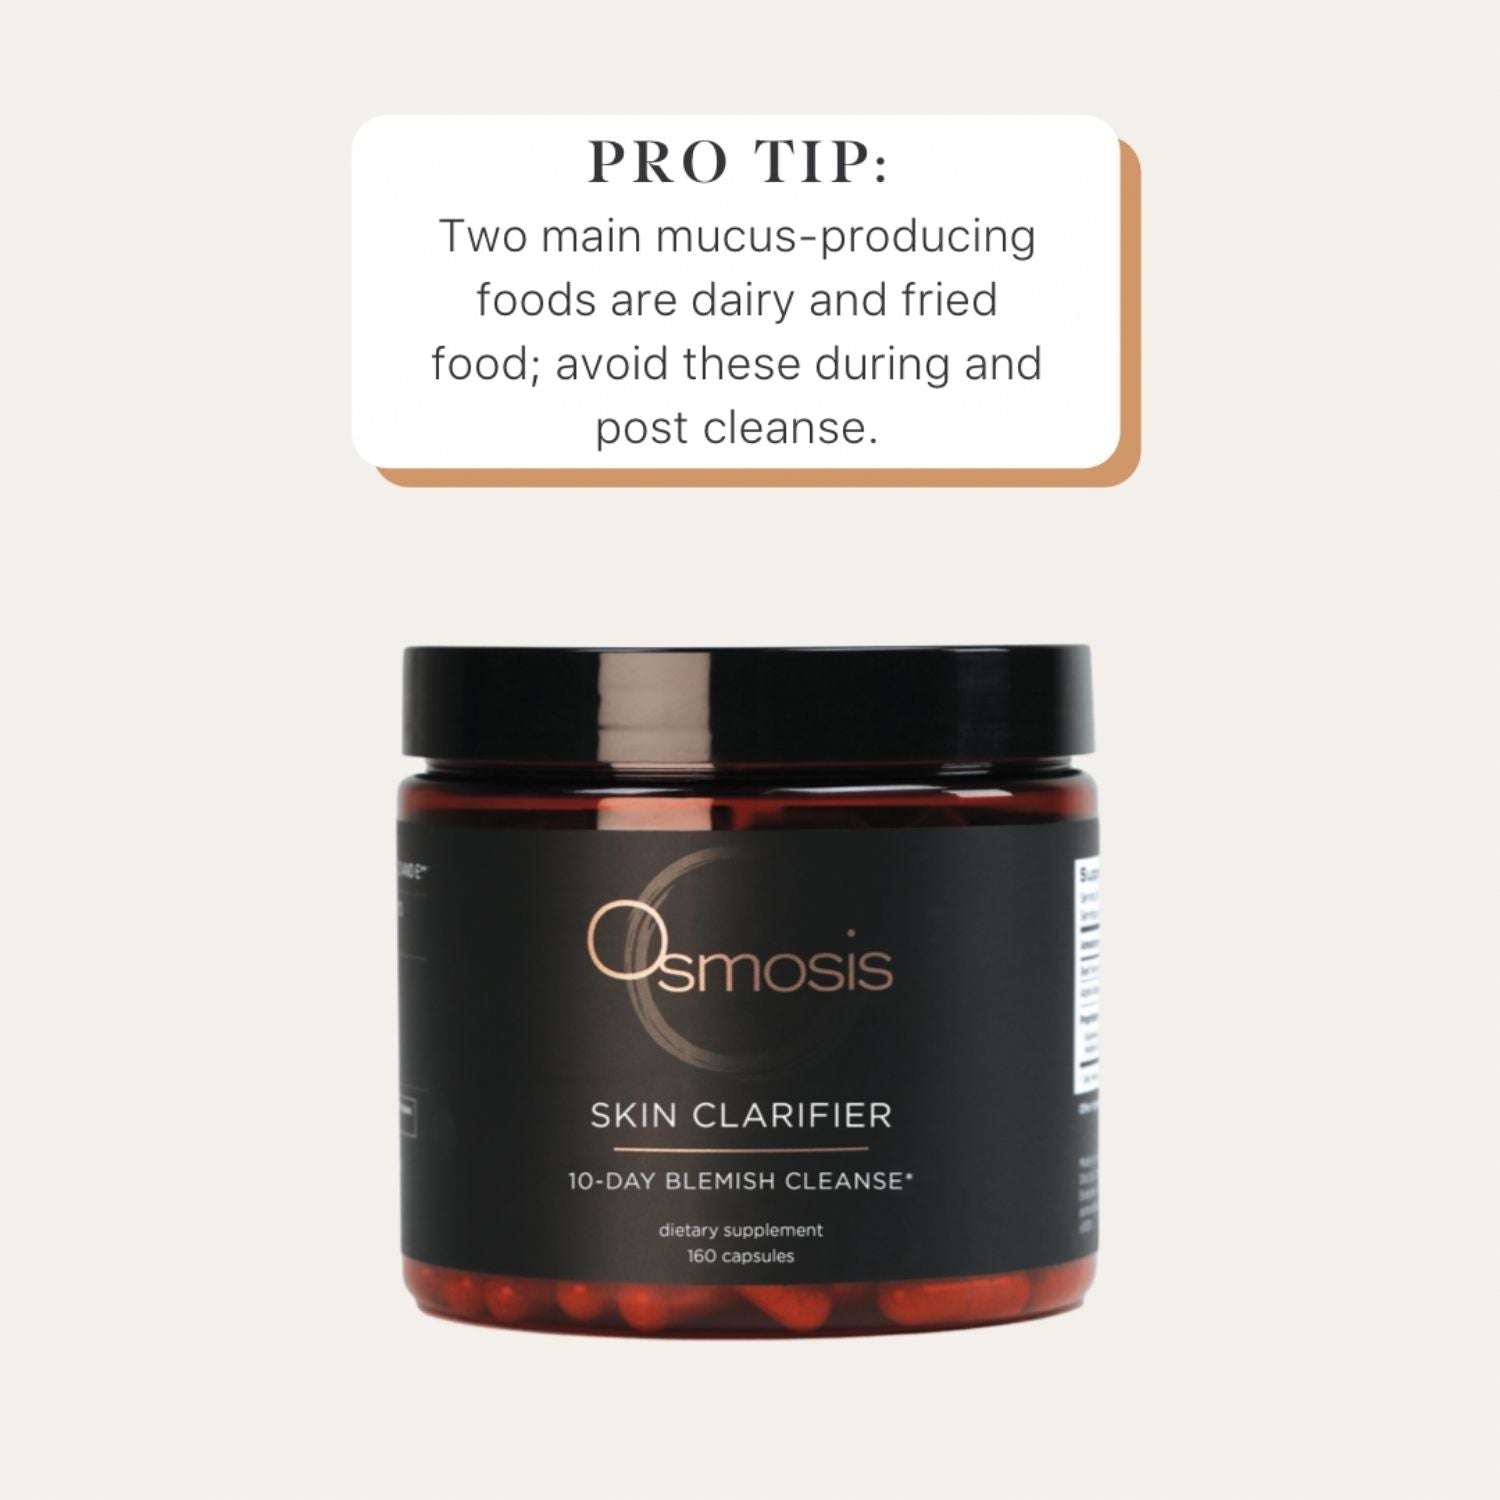 pro tip text paired with skin clarifier supplement capsules container on white background